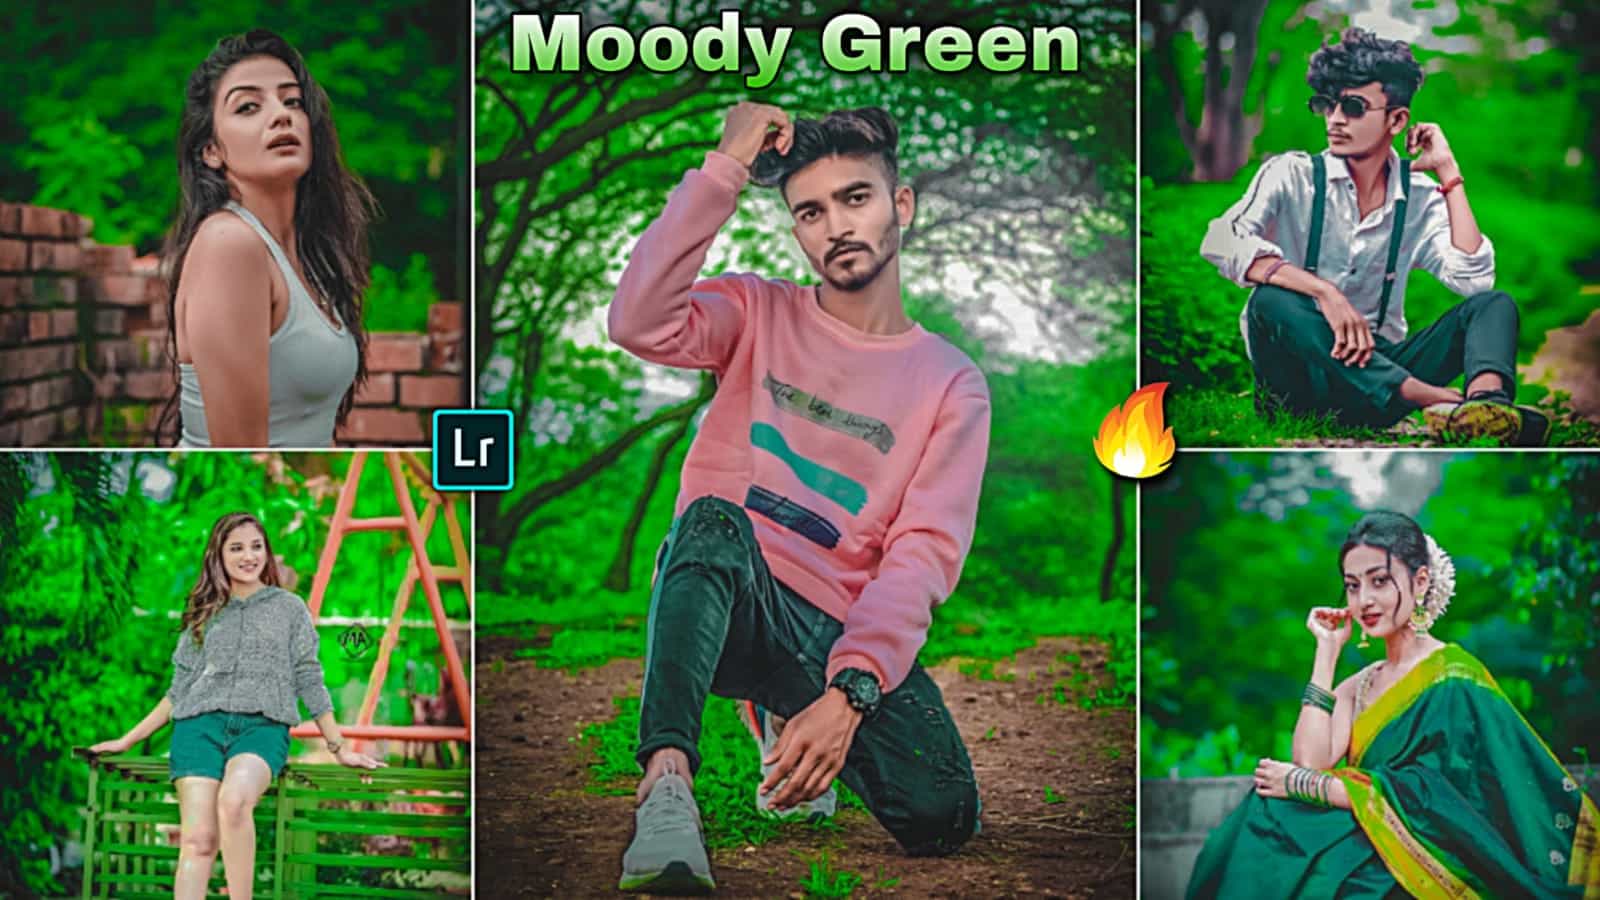 Lightroom Presets for Green Background - PABITRA EDITOGRAPHY -  